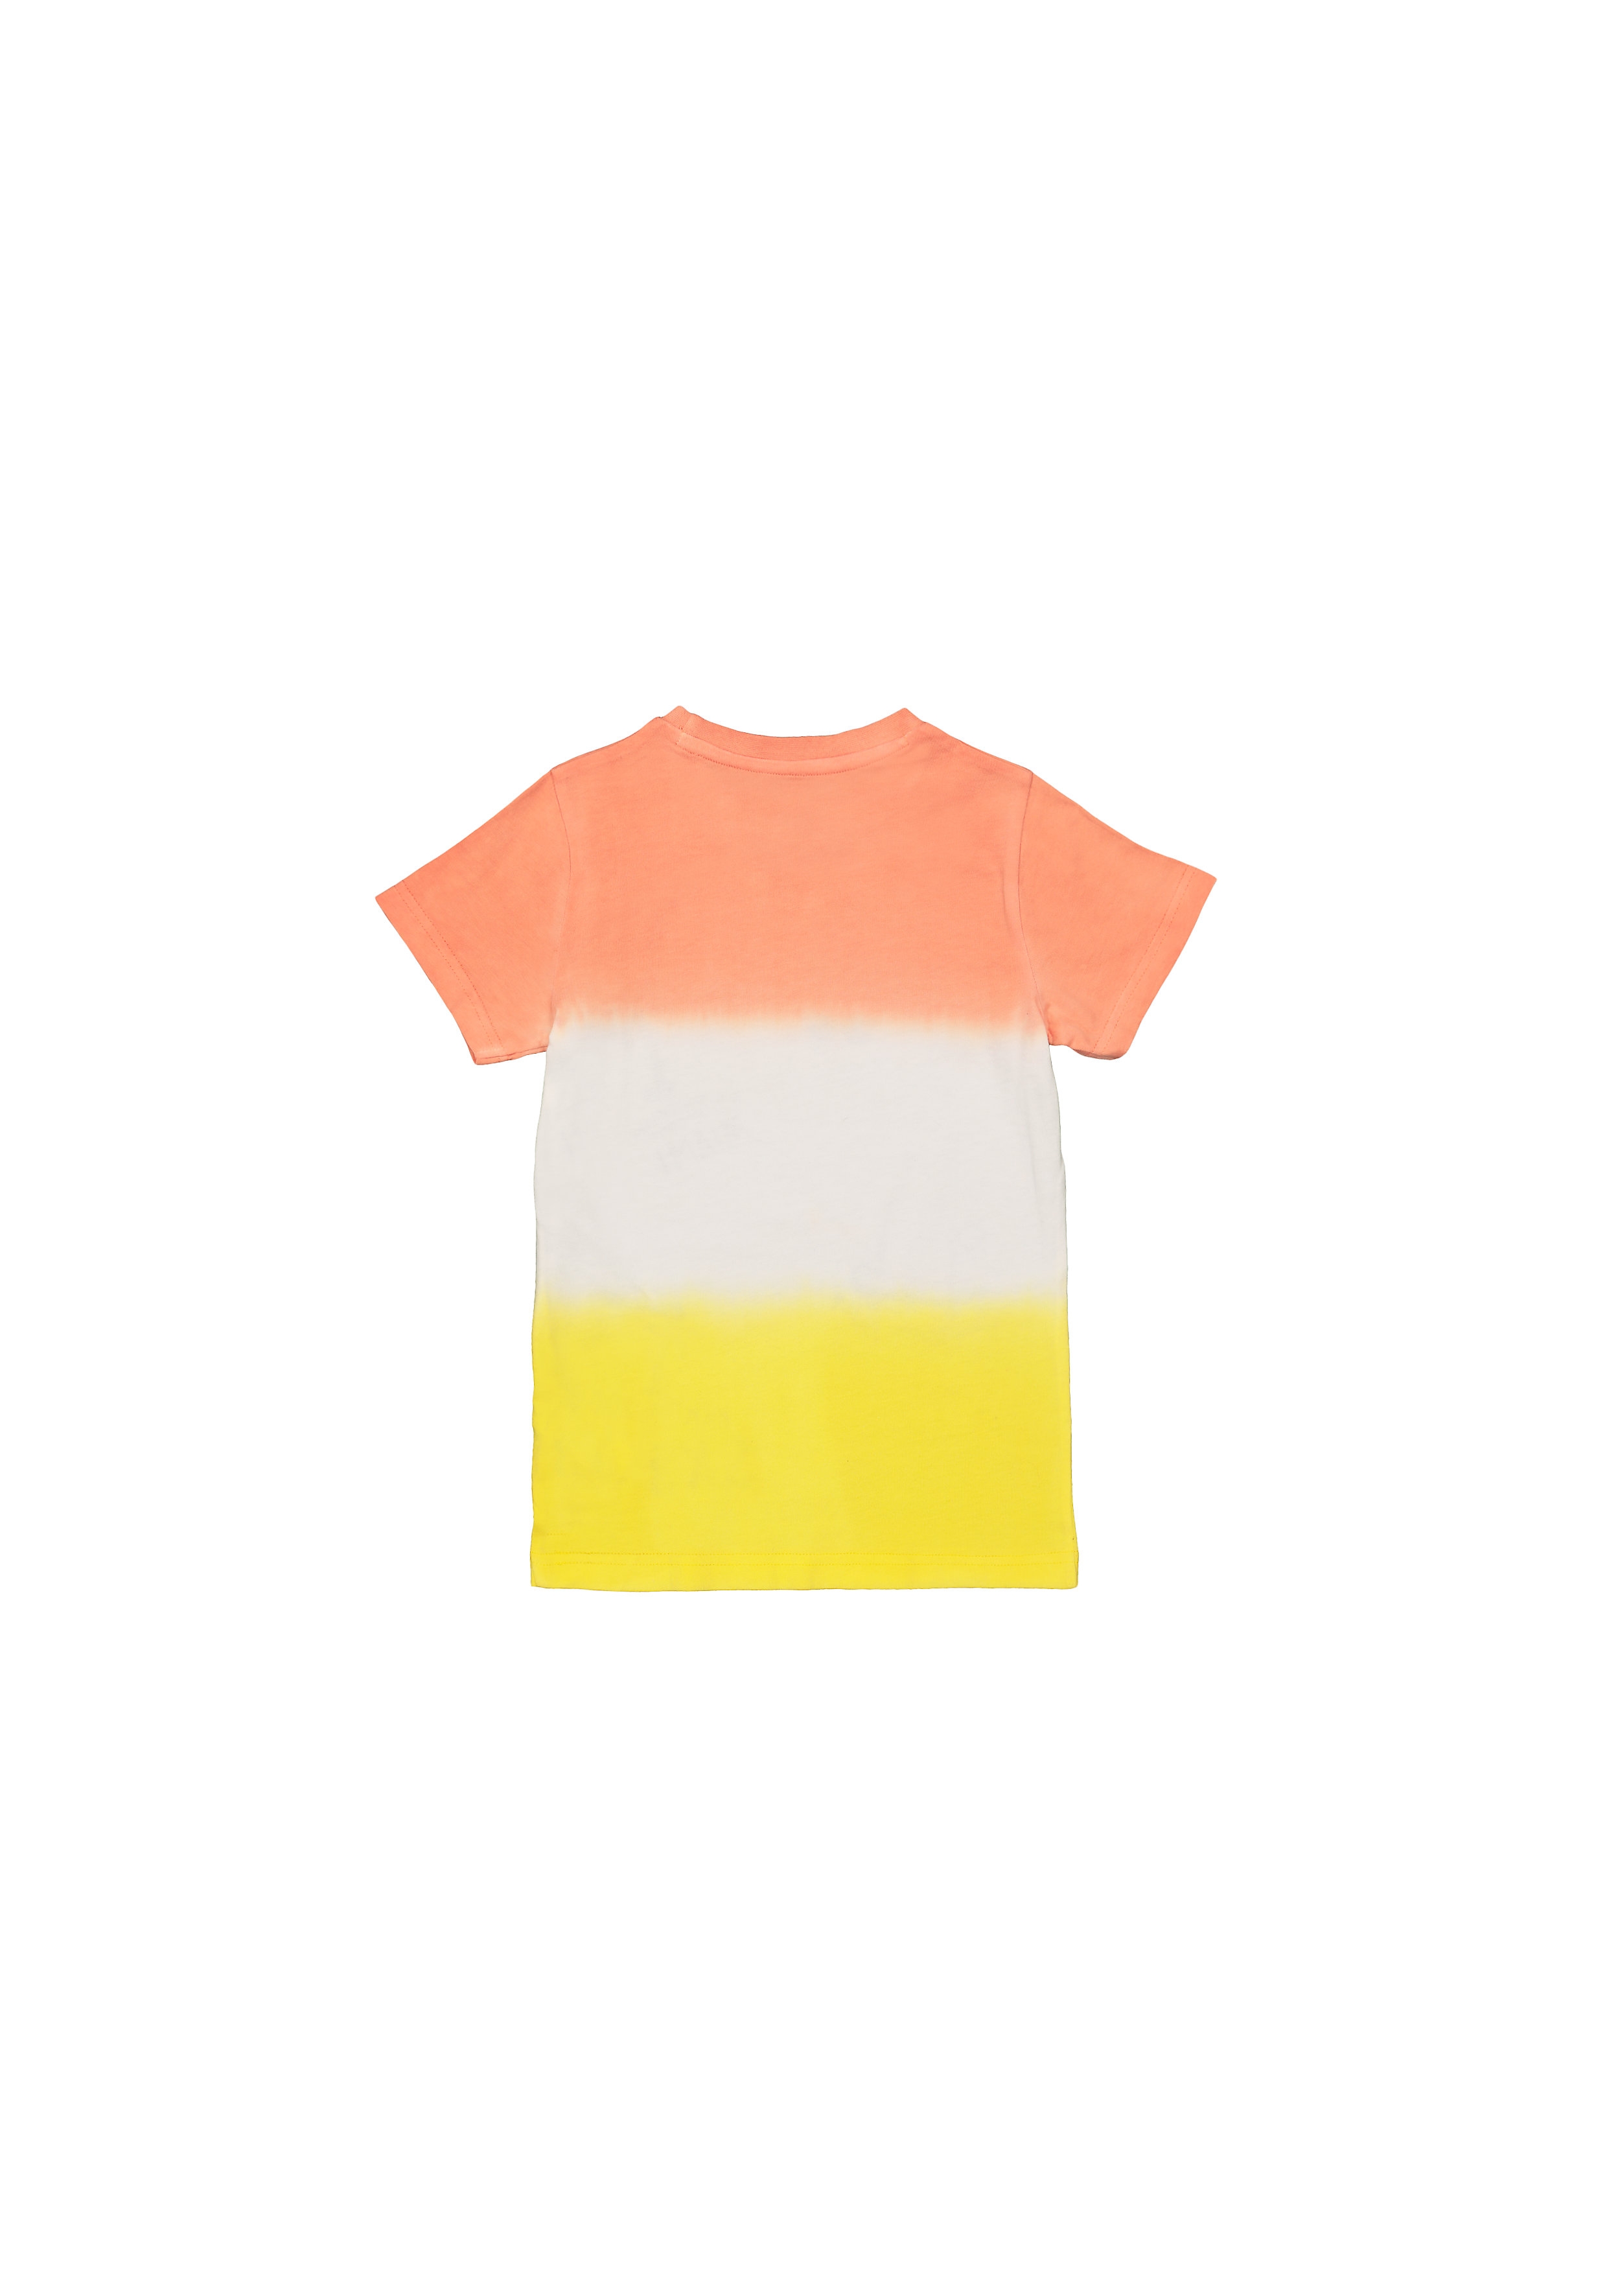 Mothercare | Boys Half Sleeves T-Shirt Ombre Print - Pink White Yellow 1